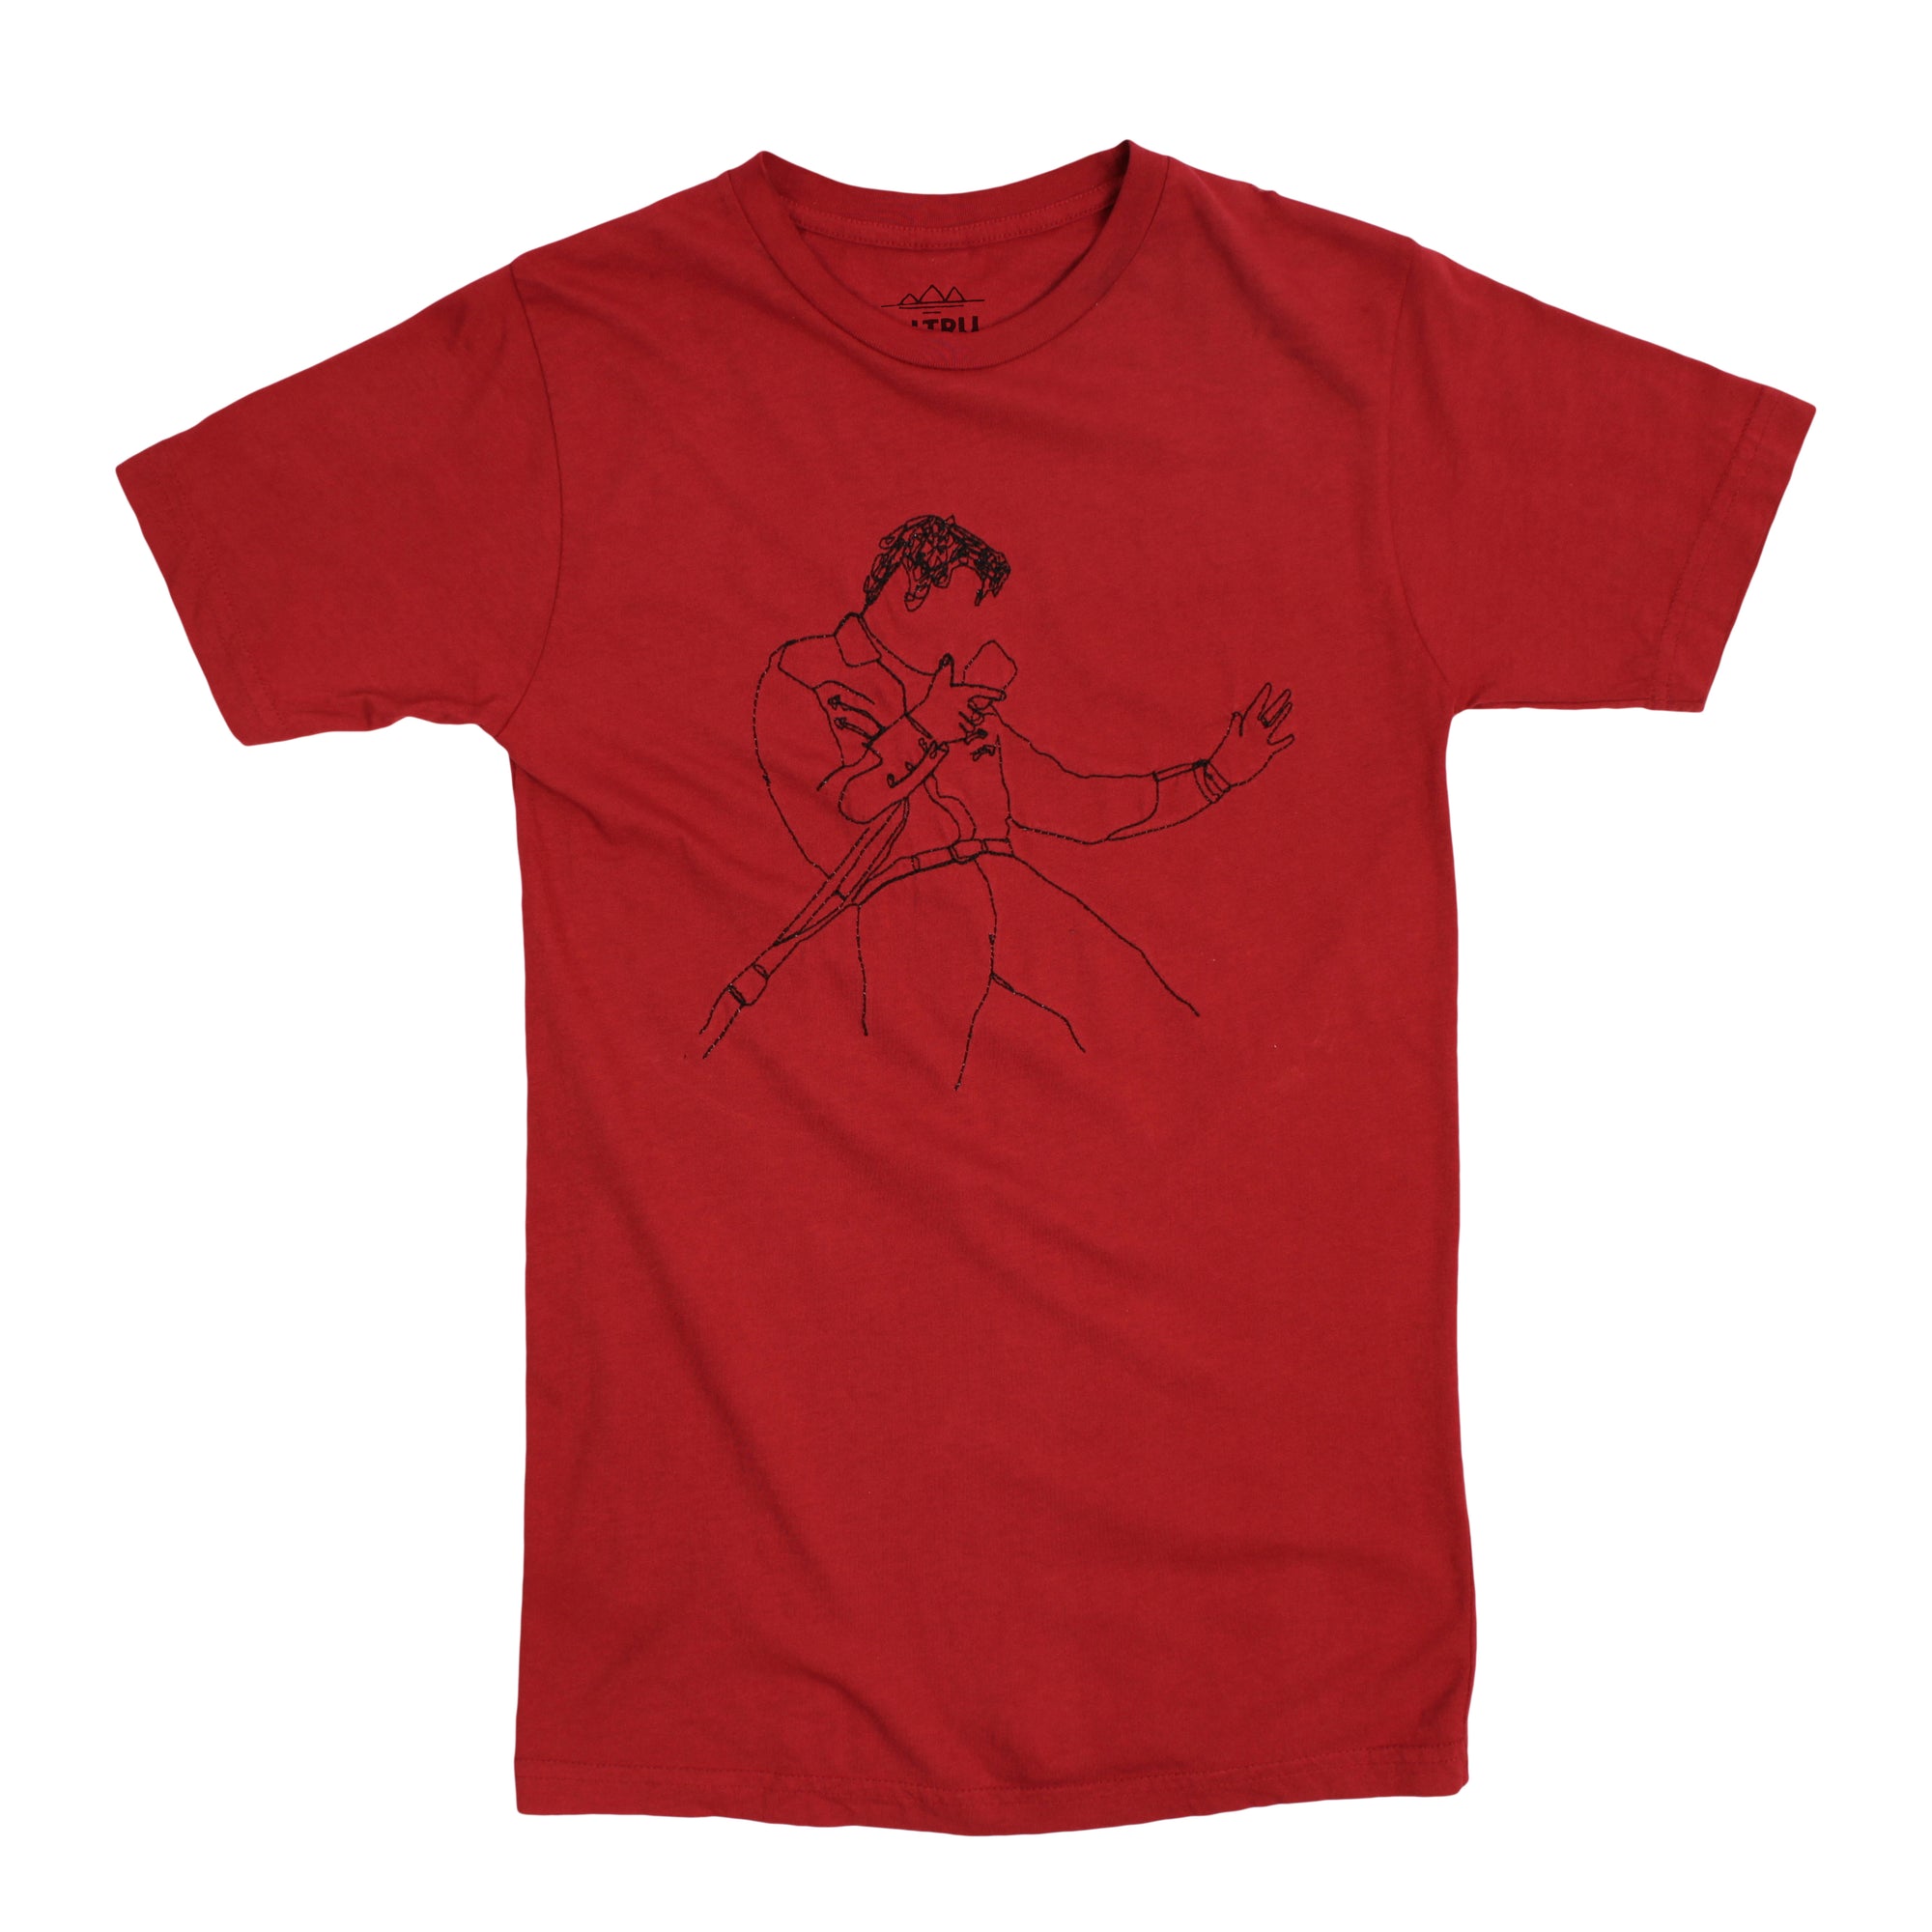 Elvis Embroidered red T-shirt by Altru Apparel